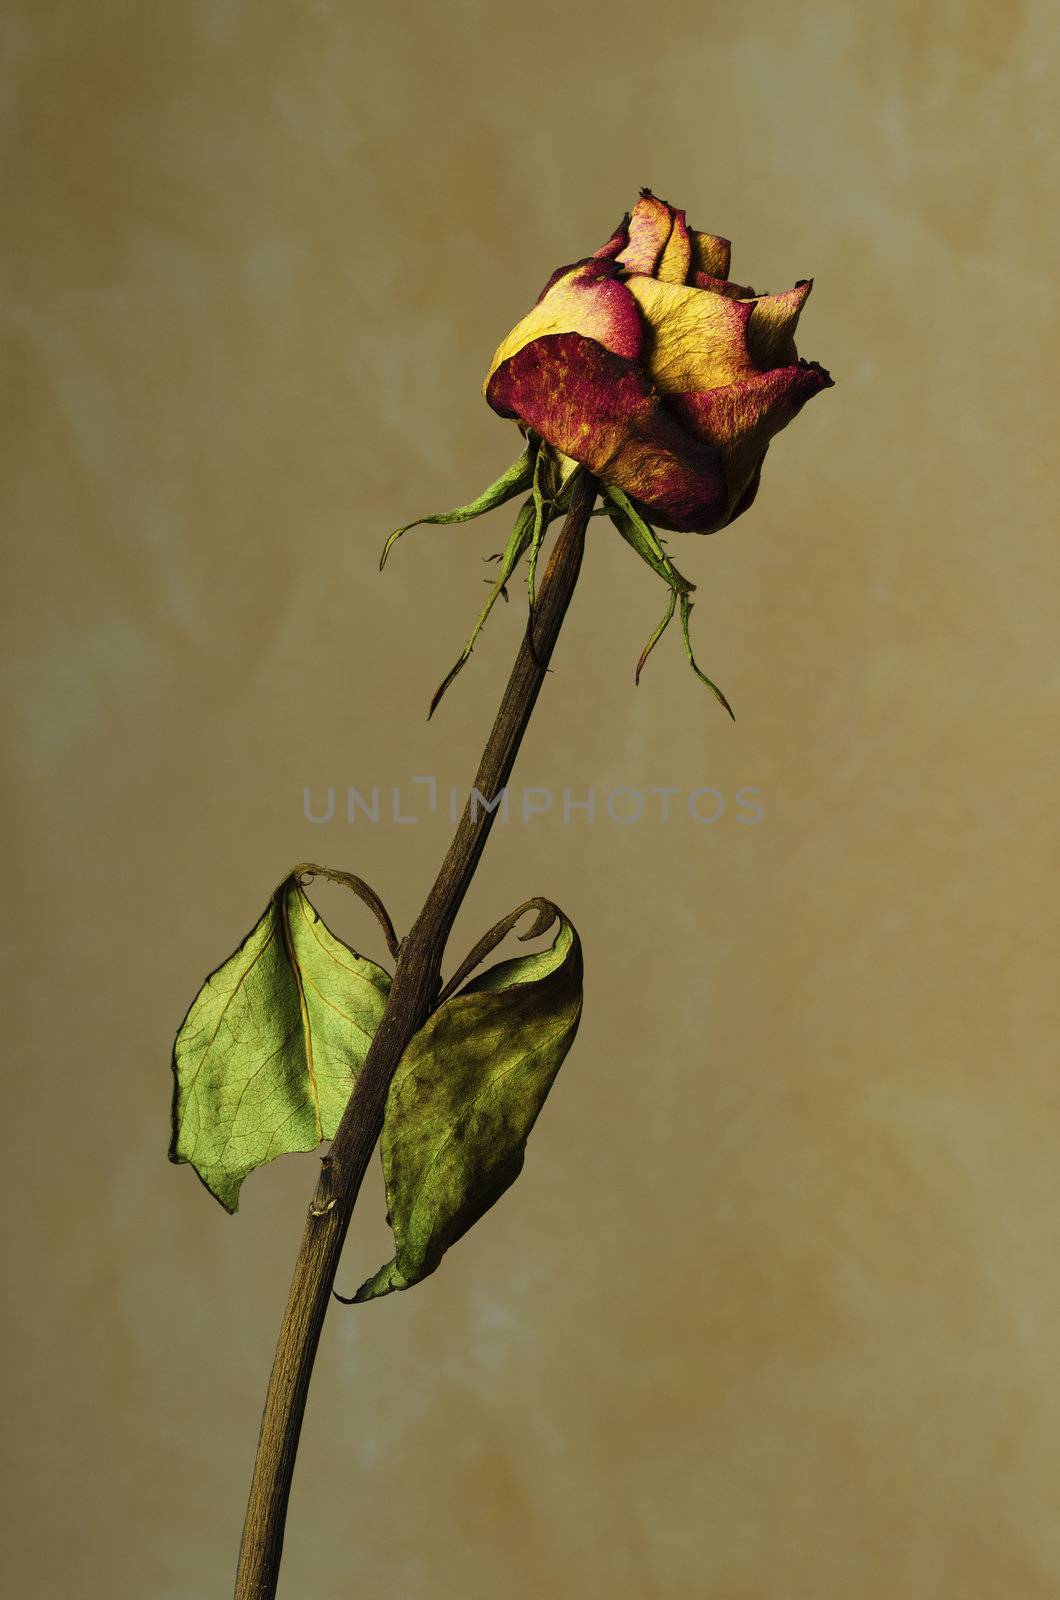 A Withered rose on a yellow textured background.